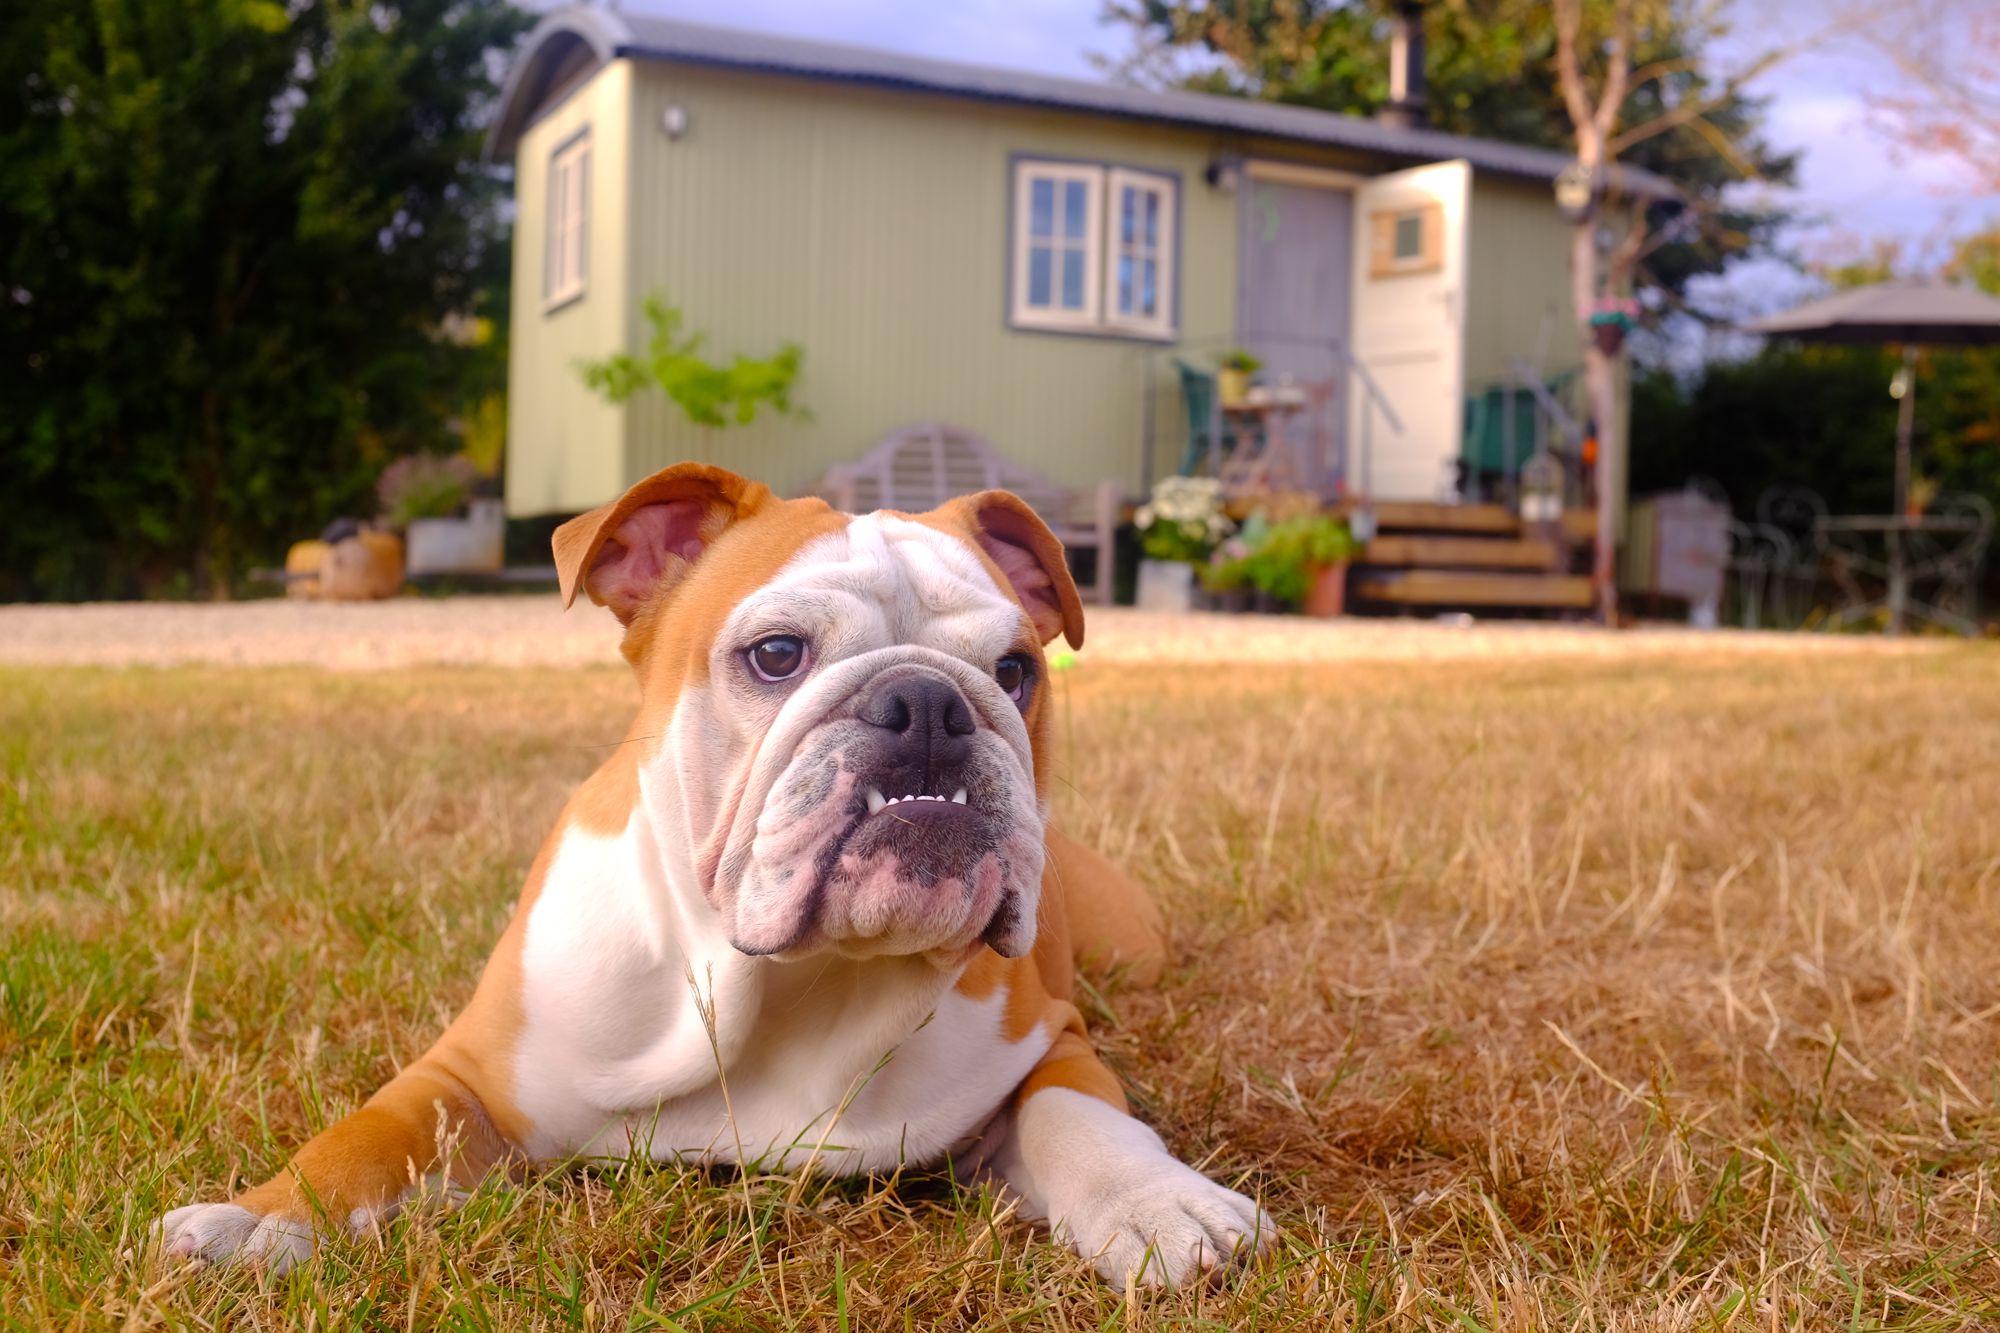 Dog friendly glamping – pet-friendly glamping stays